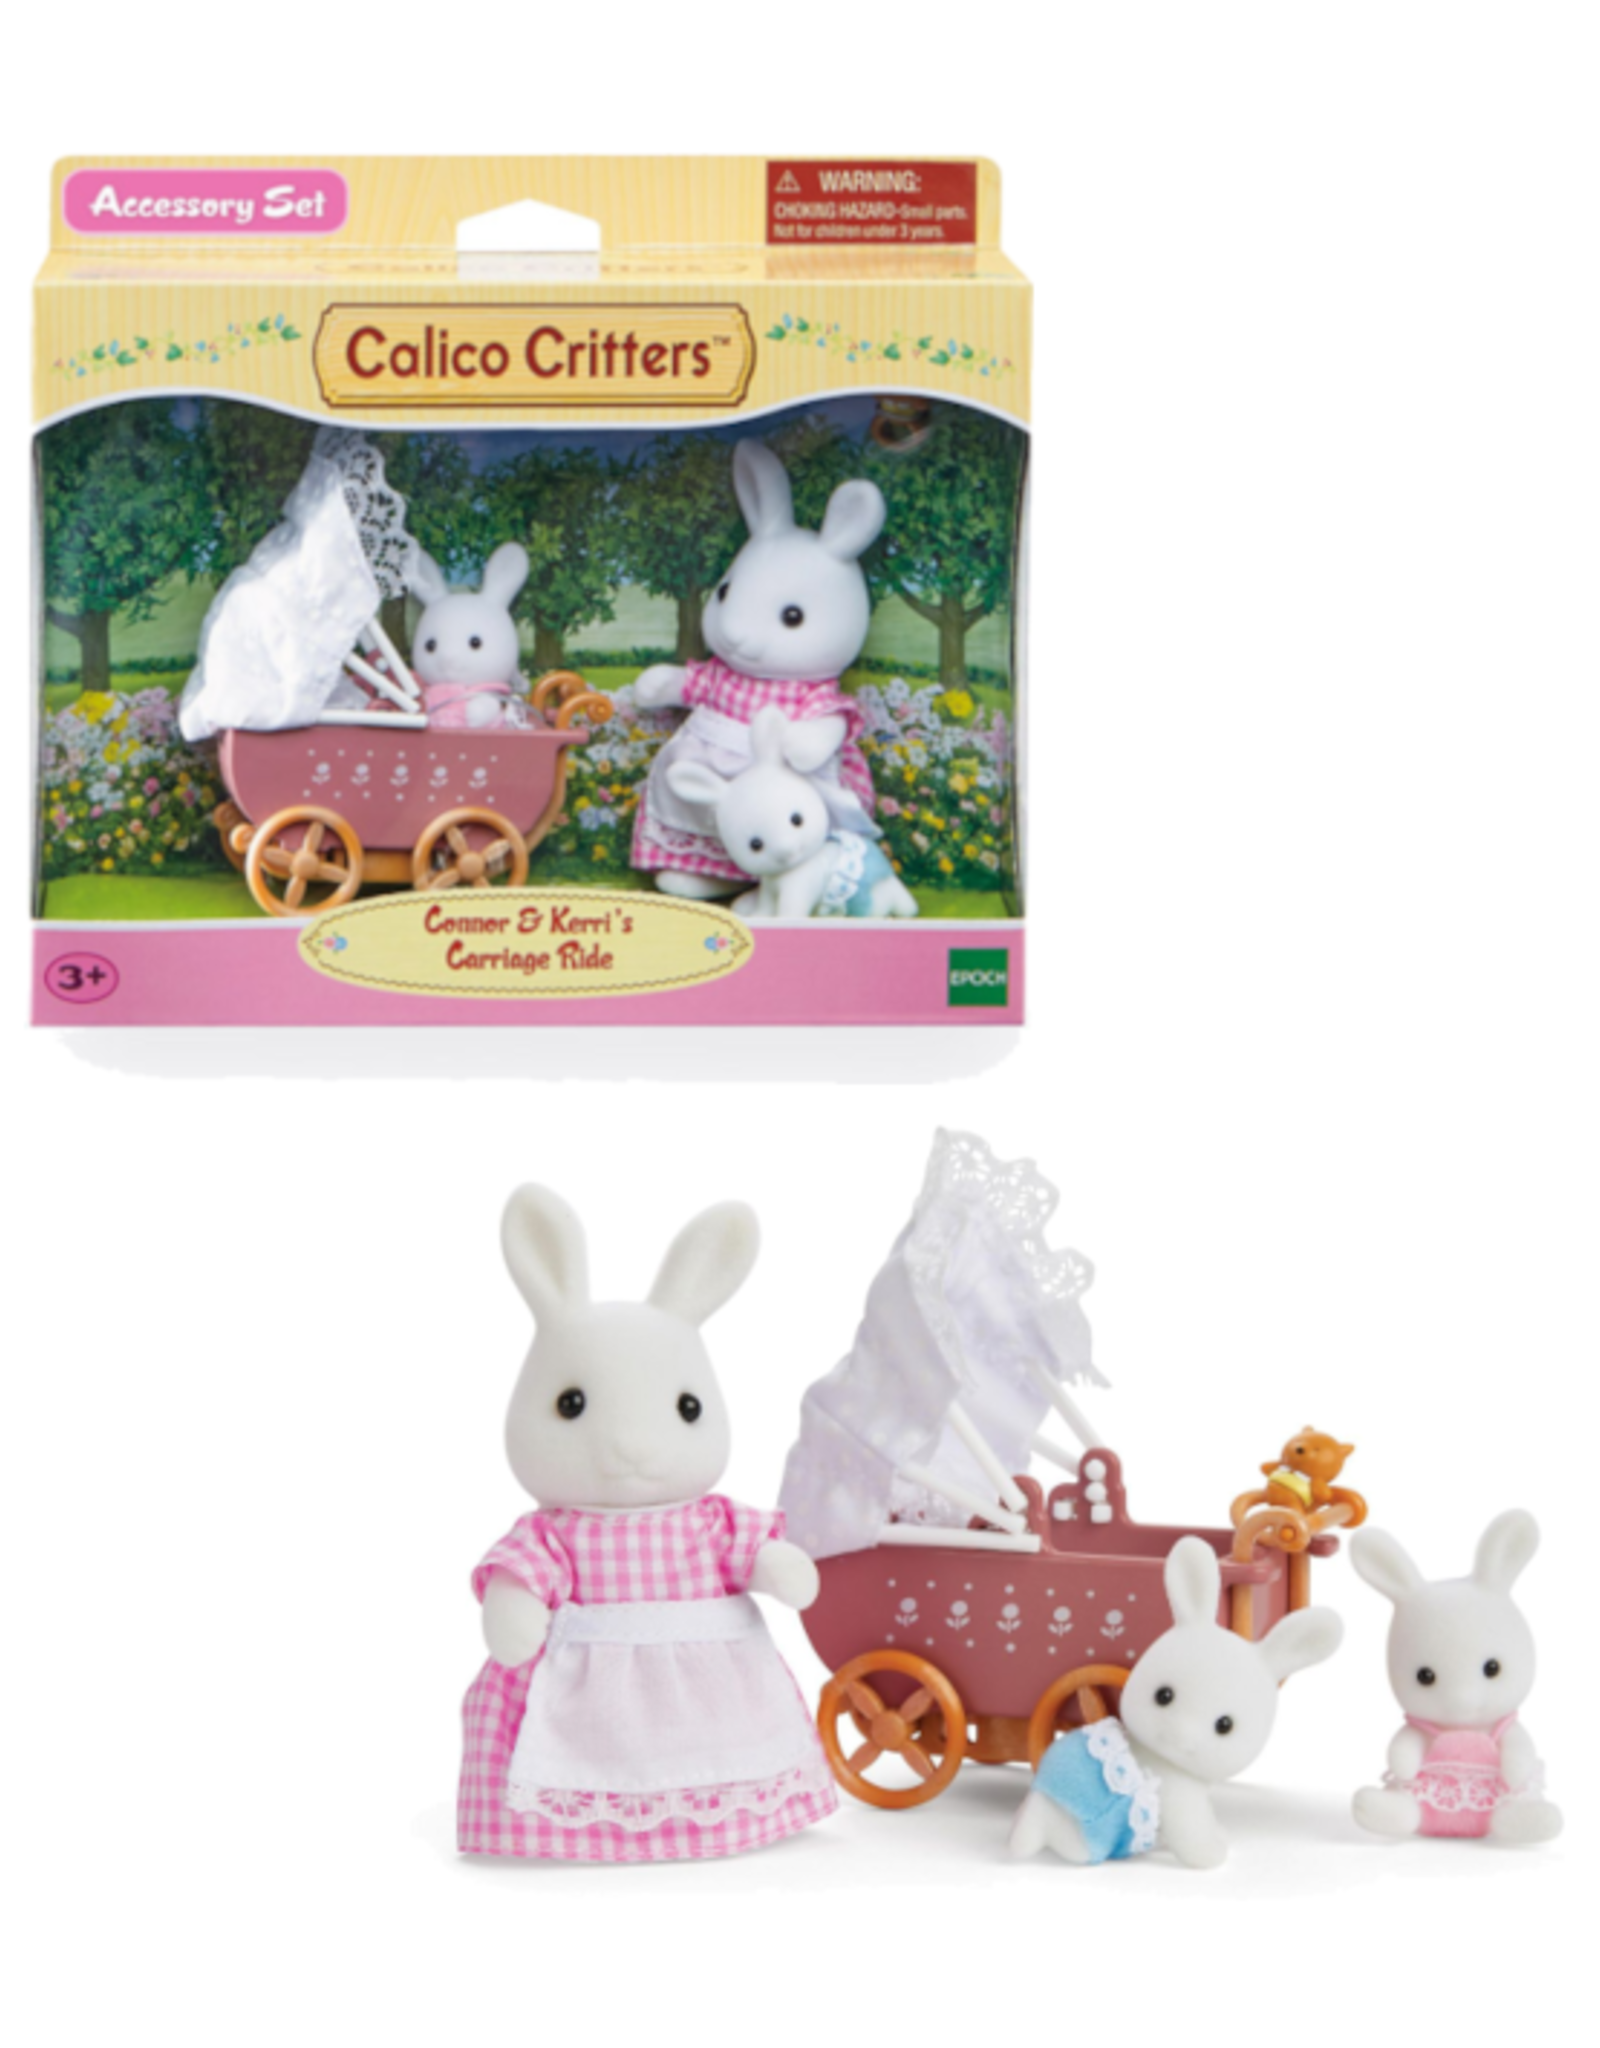 Calico Critters Calico Critters - Connor & Kerri's Carriage Ride